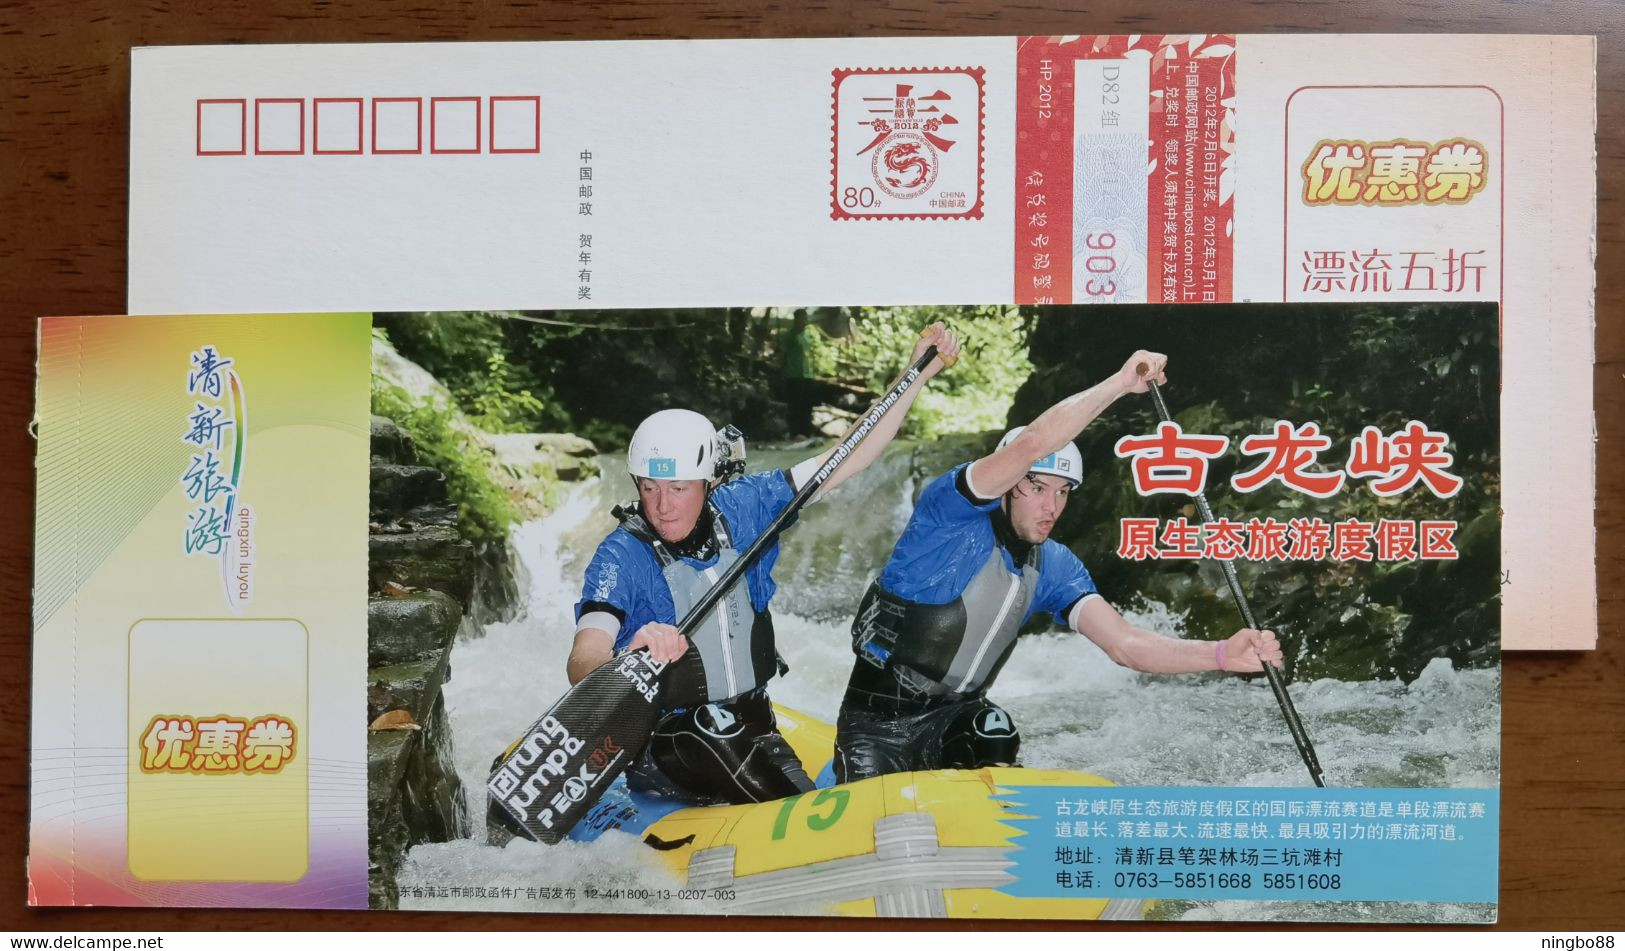 Stream Rafting On Rubber Boat In Gulong Gorge,China 2008 Qingxian County Original Eco-tourism Resort Pre-stamped Card - Rafting